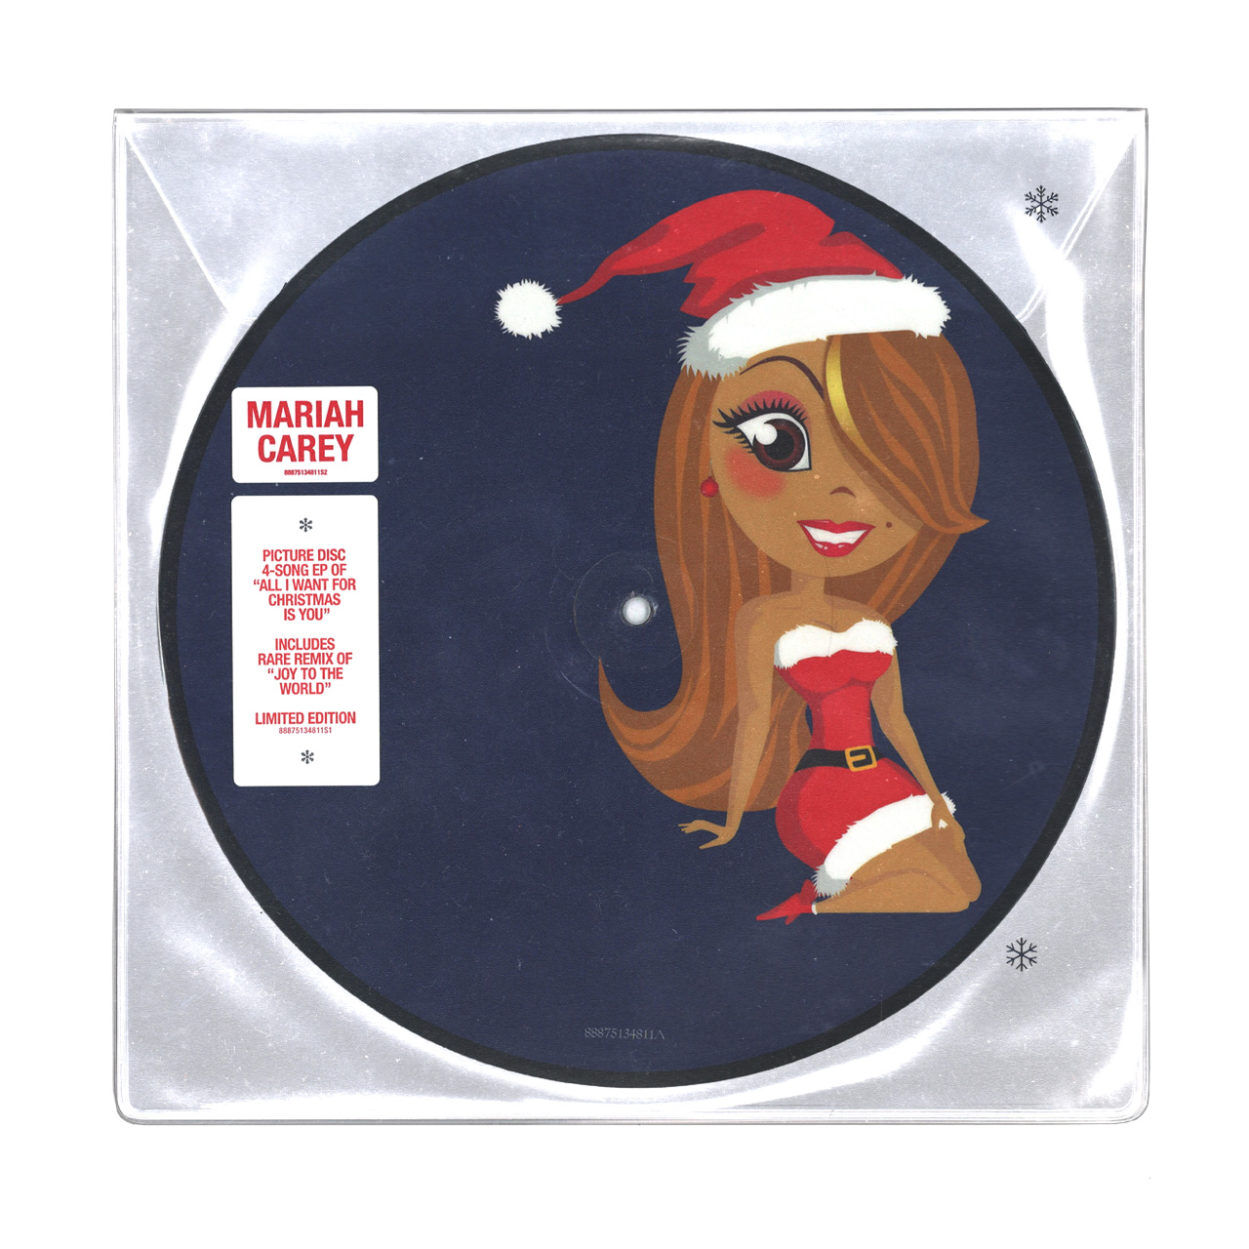 MARIAH CAREY All I Want For Christmas Is You 10inch Picture Disc Vinyl